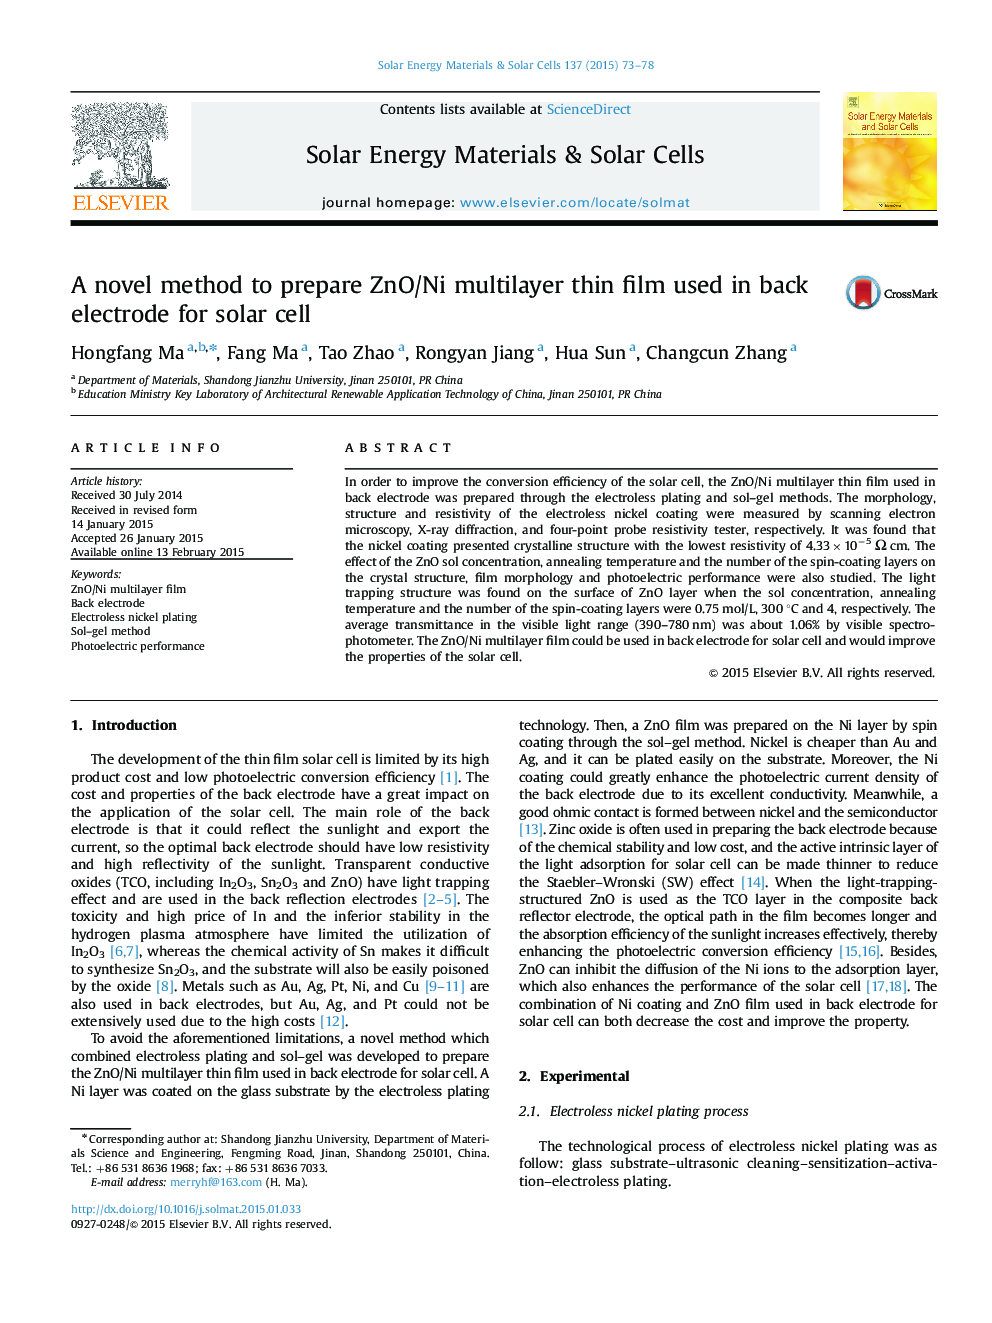 A novel method to prepare ZnO/Ni multilayer thin film used in back electrode for solar cell